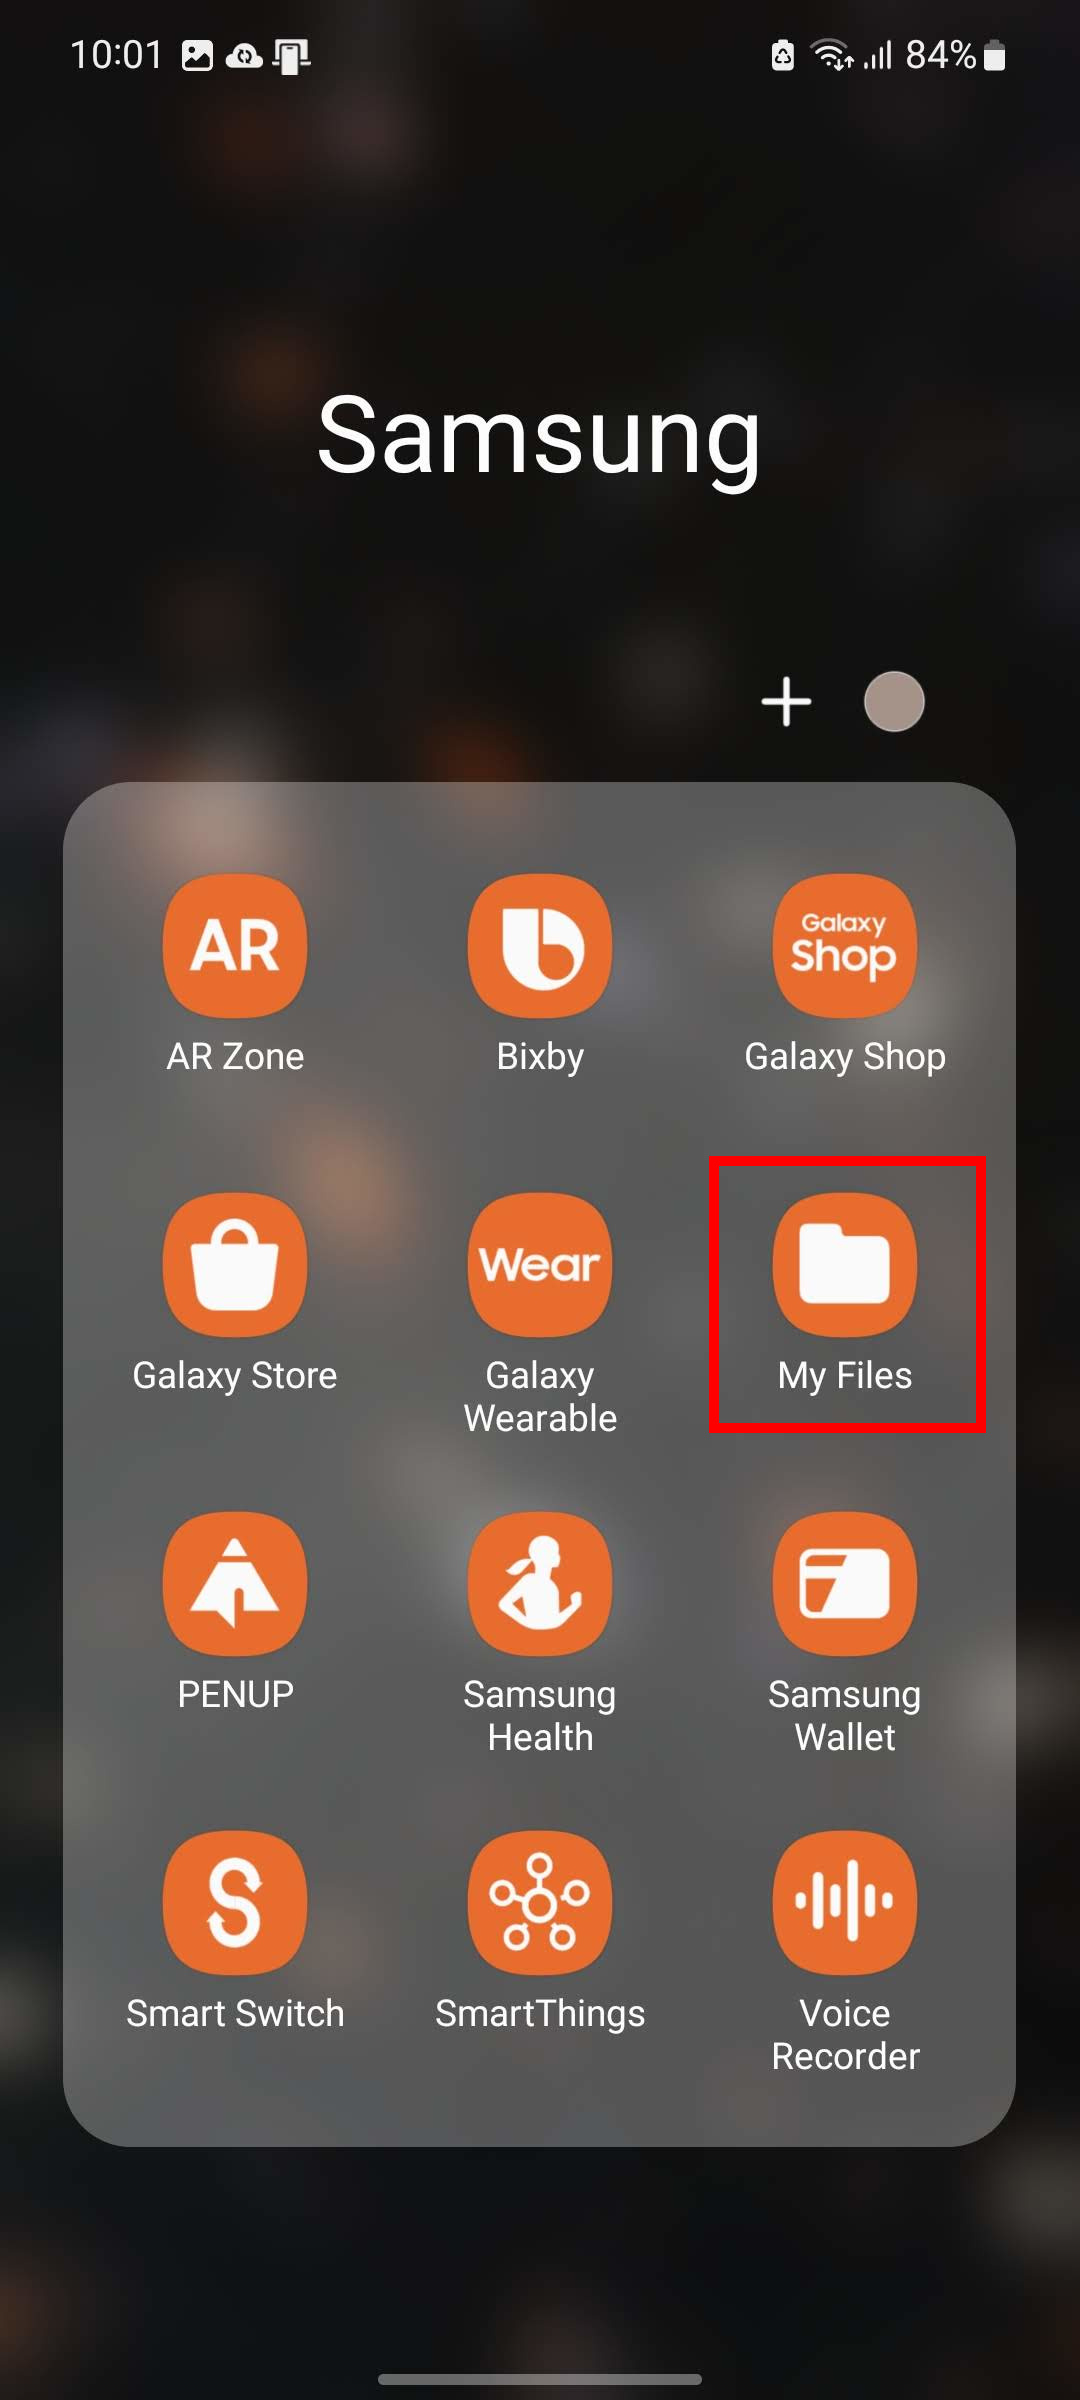 The Samsung folder with My Files highlighted.